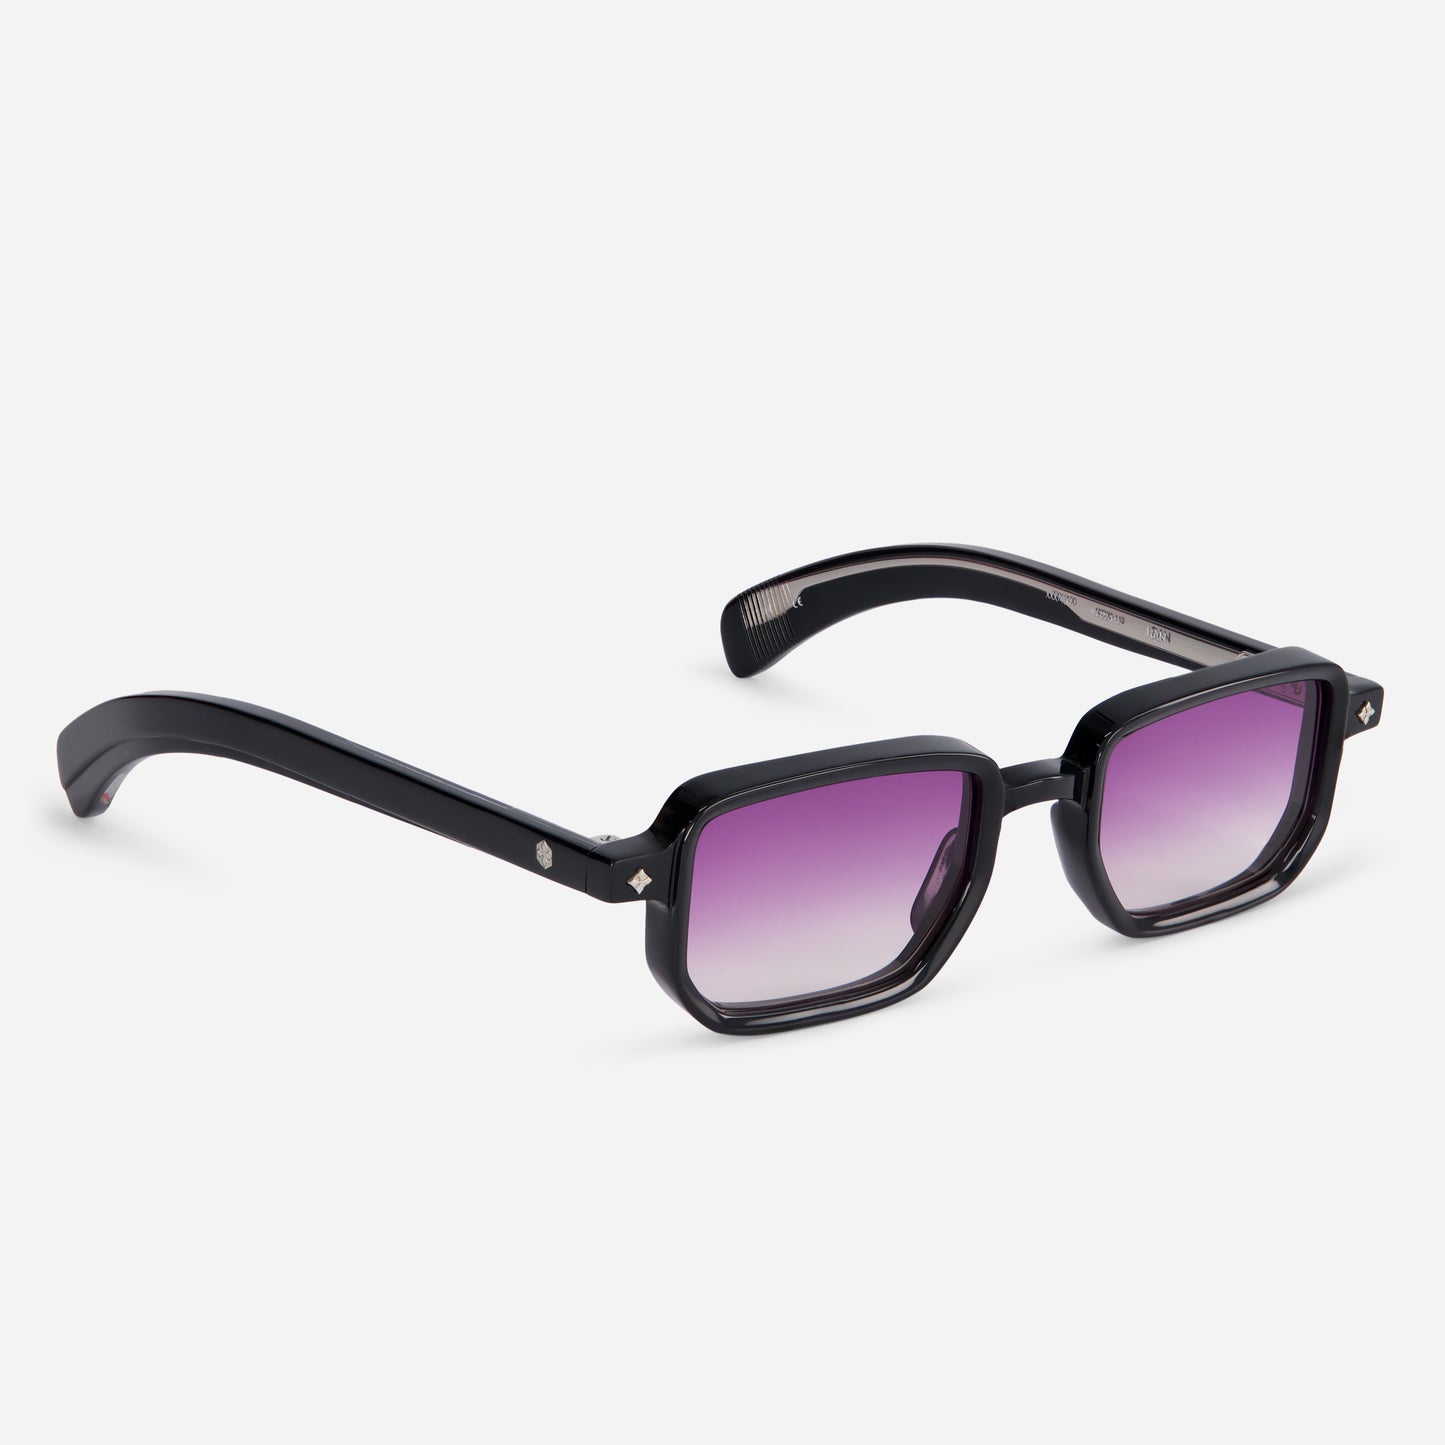 Explore the captivating blend of a Japanese acetate frame in Noir color with gradient purple lenses in the Ran N-1.